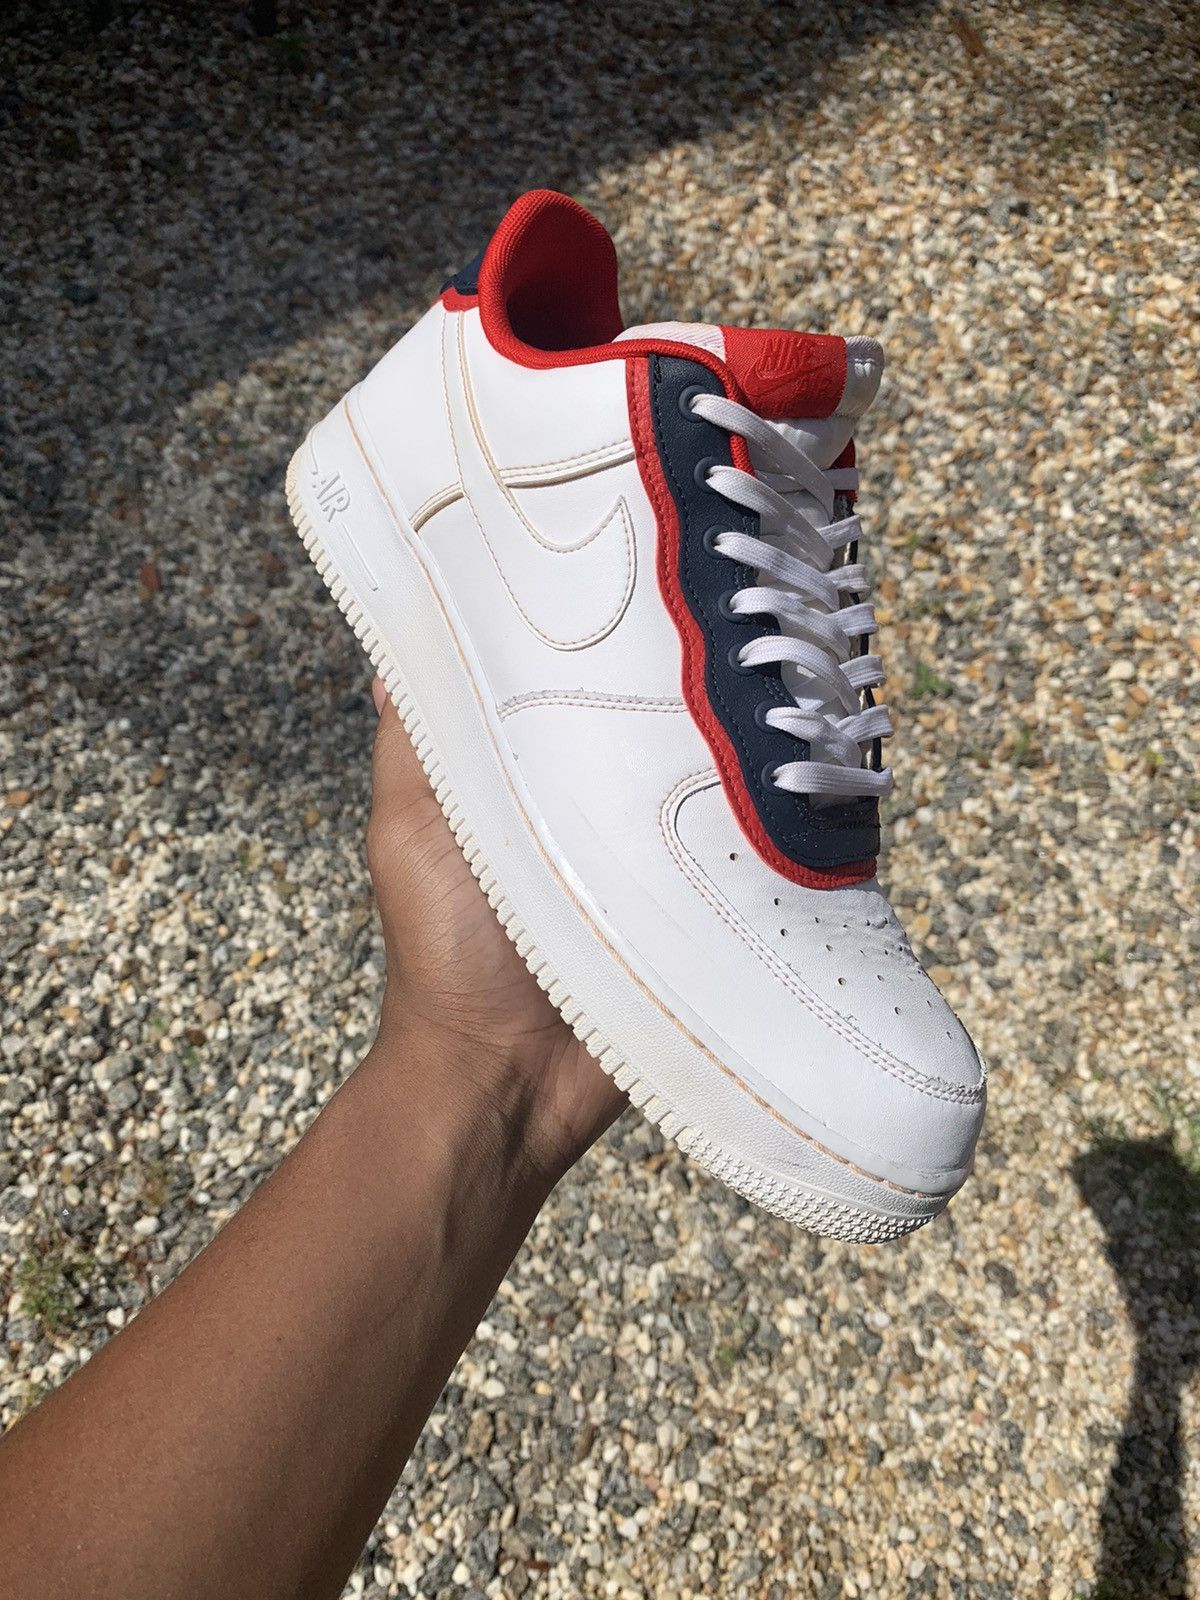 Nike Air Force 1 '07 LV8 Double Layer - Obsidian Red 2019 Size 11